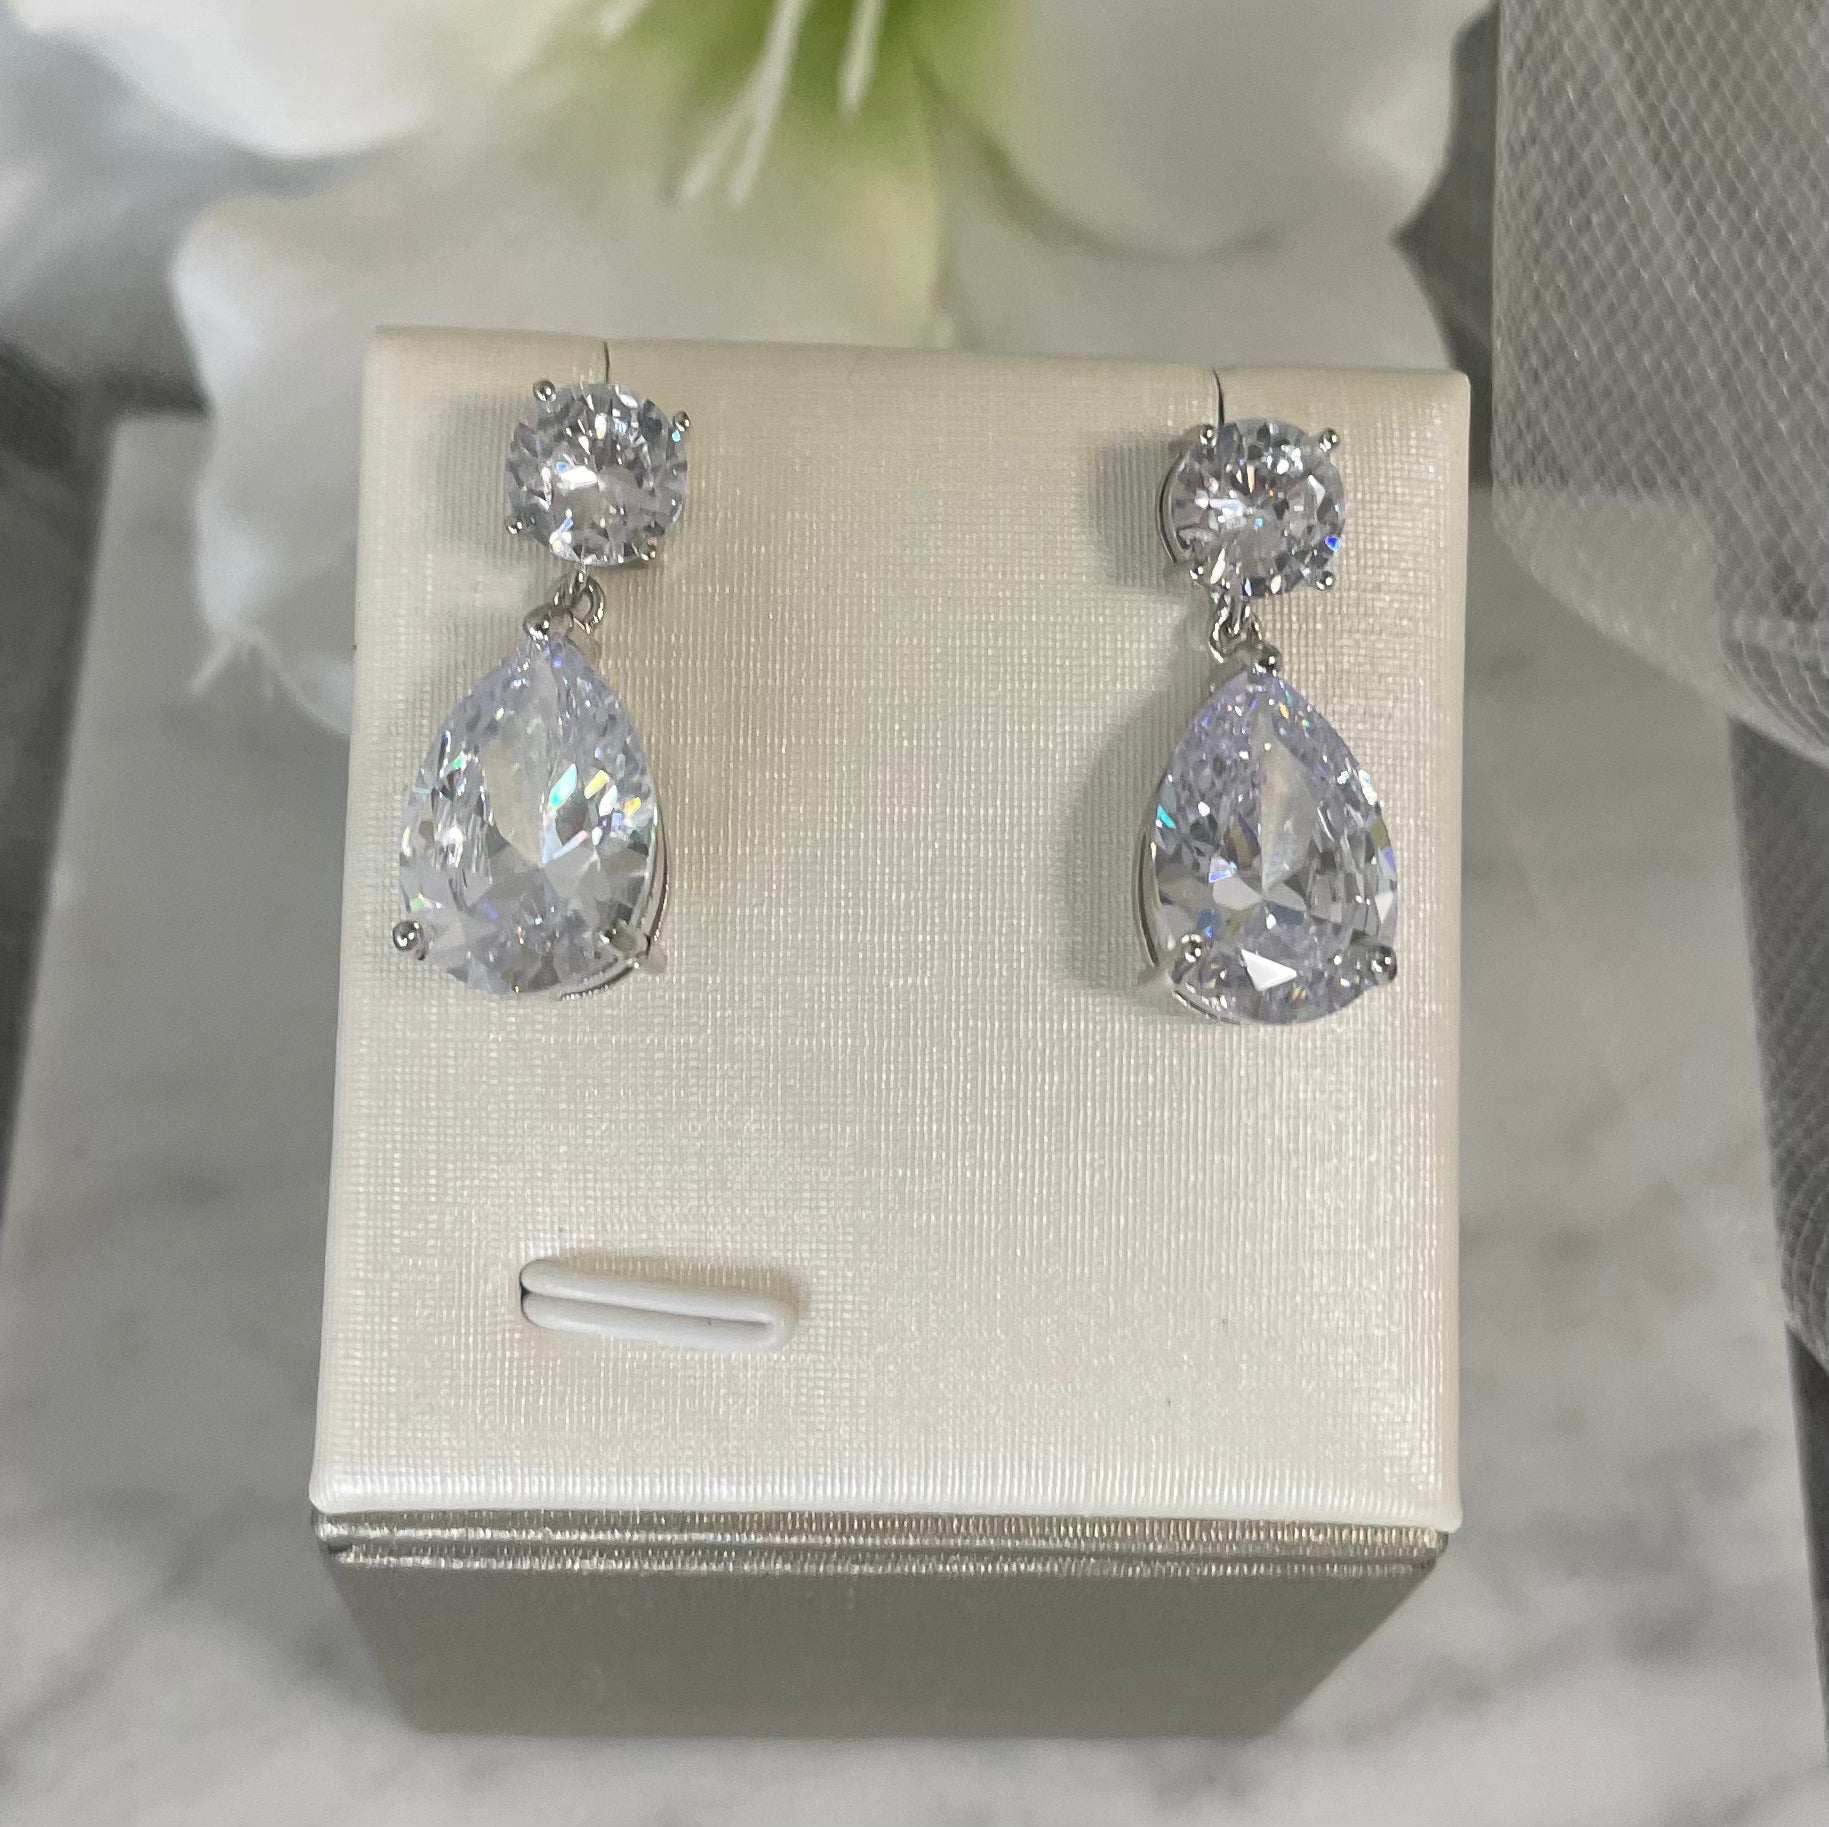 Sparkling Zoe Diamante Silver CZ Pear Shaped Drop Earrings featuring two distinct-sized cubic zirconia stones hanging from a small round CZ stone.